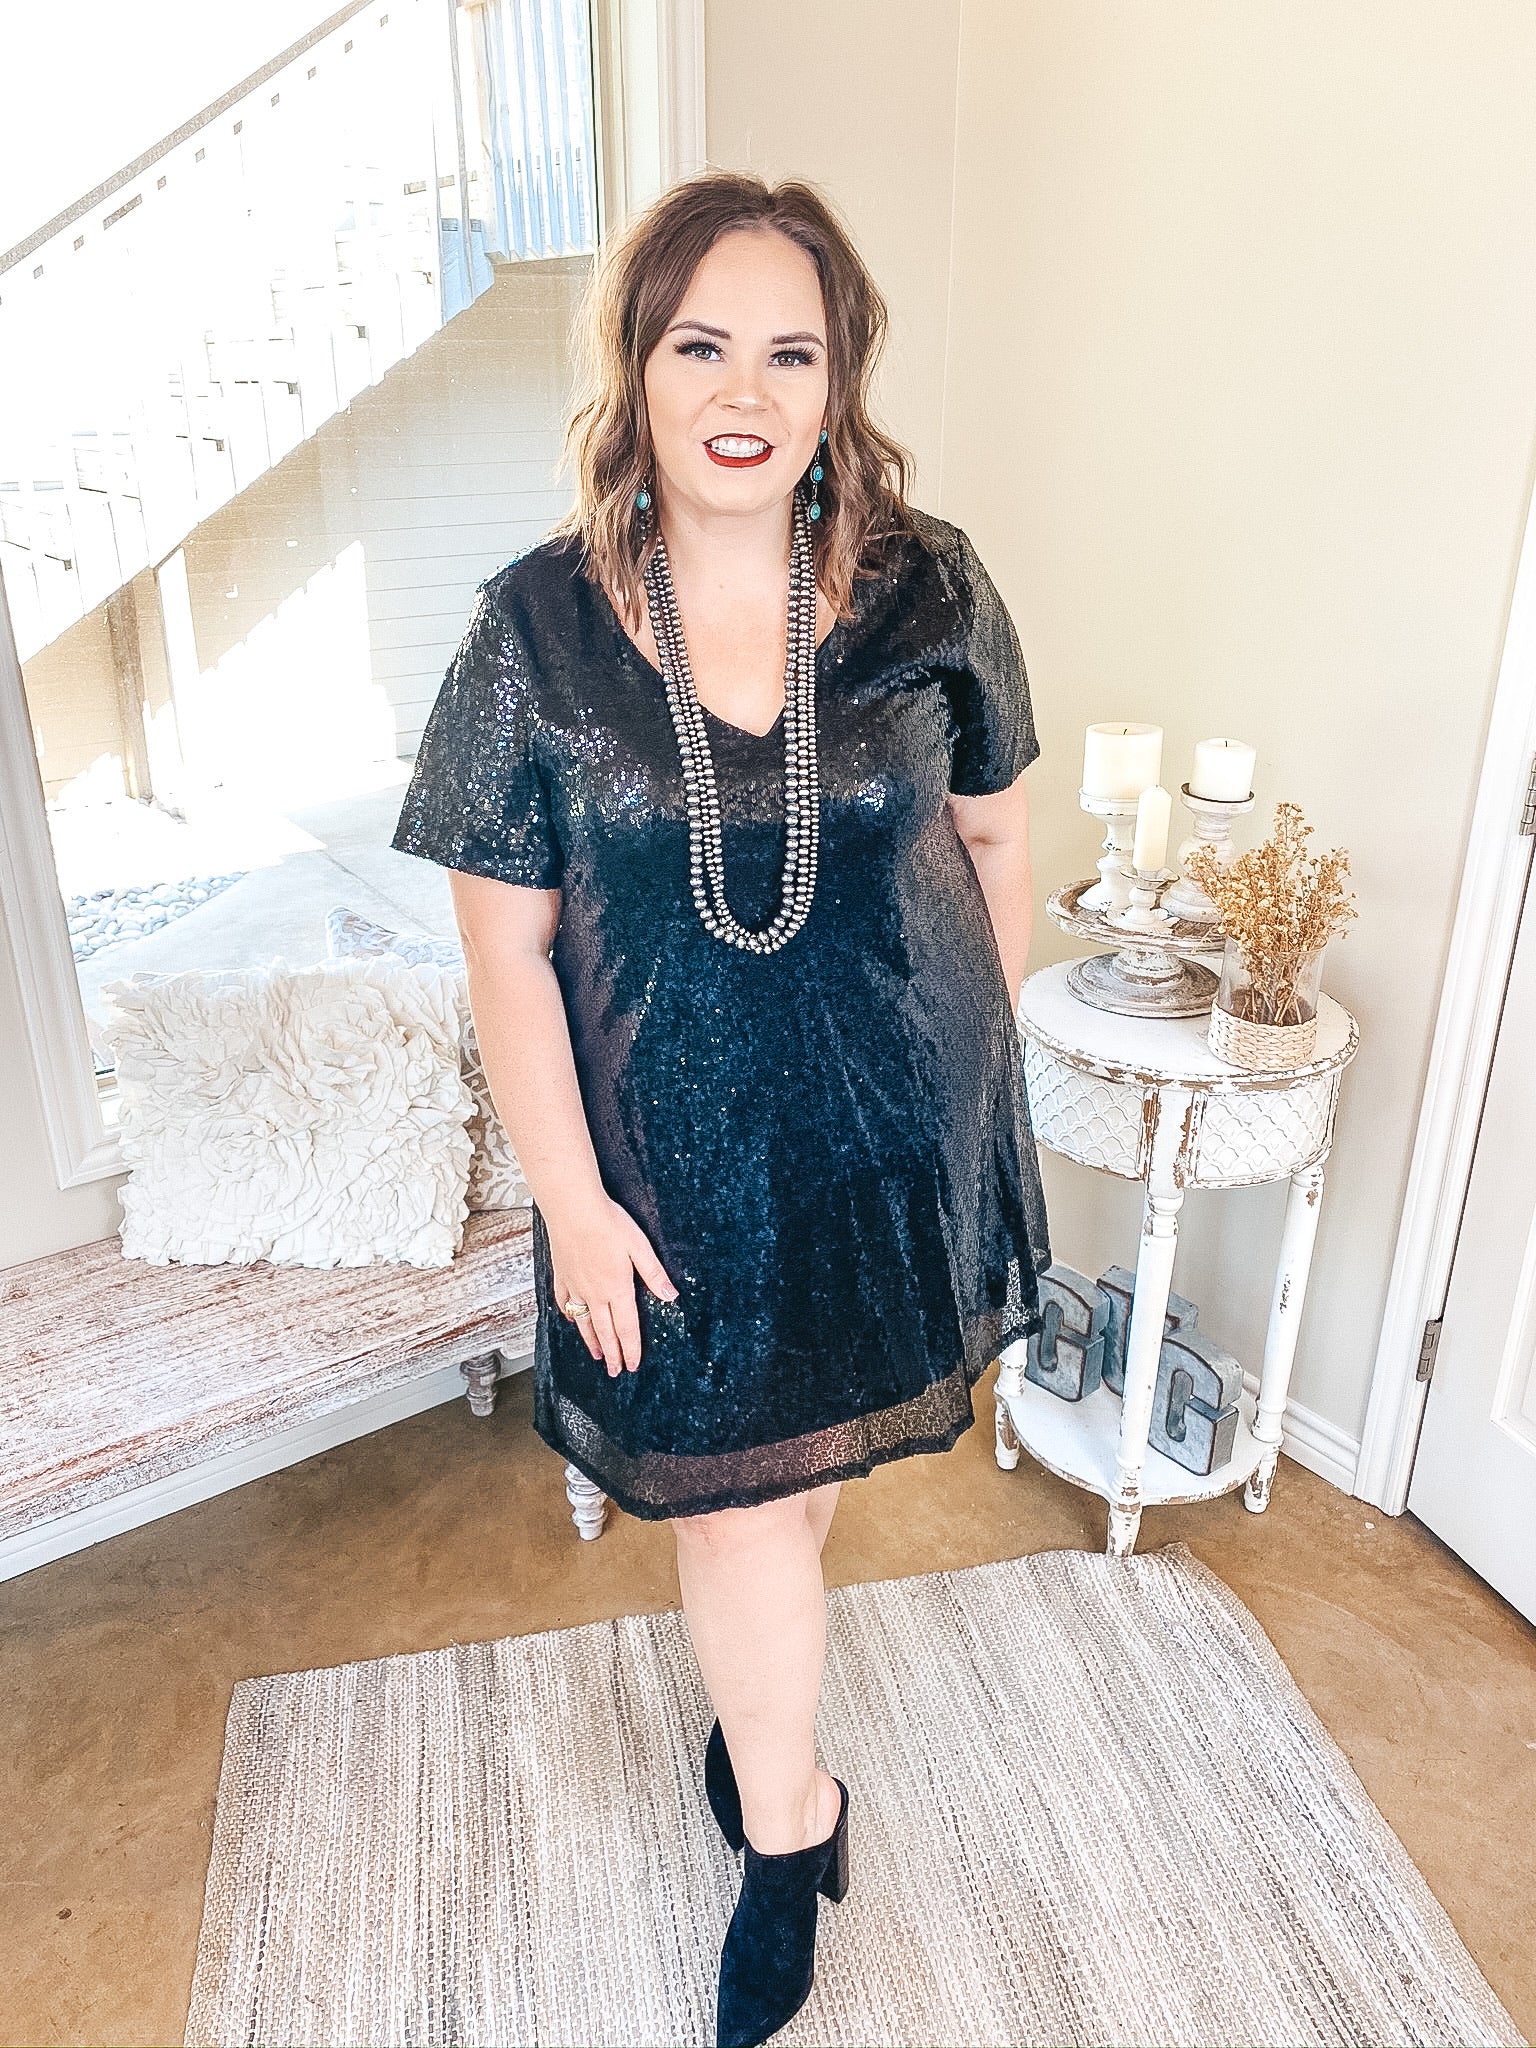 Can't Keep Up V Neck Sequin Dress with Short Sleeves in Black - Giddy Up Glamour Boutique